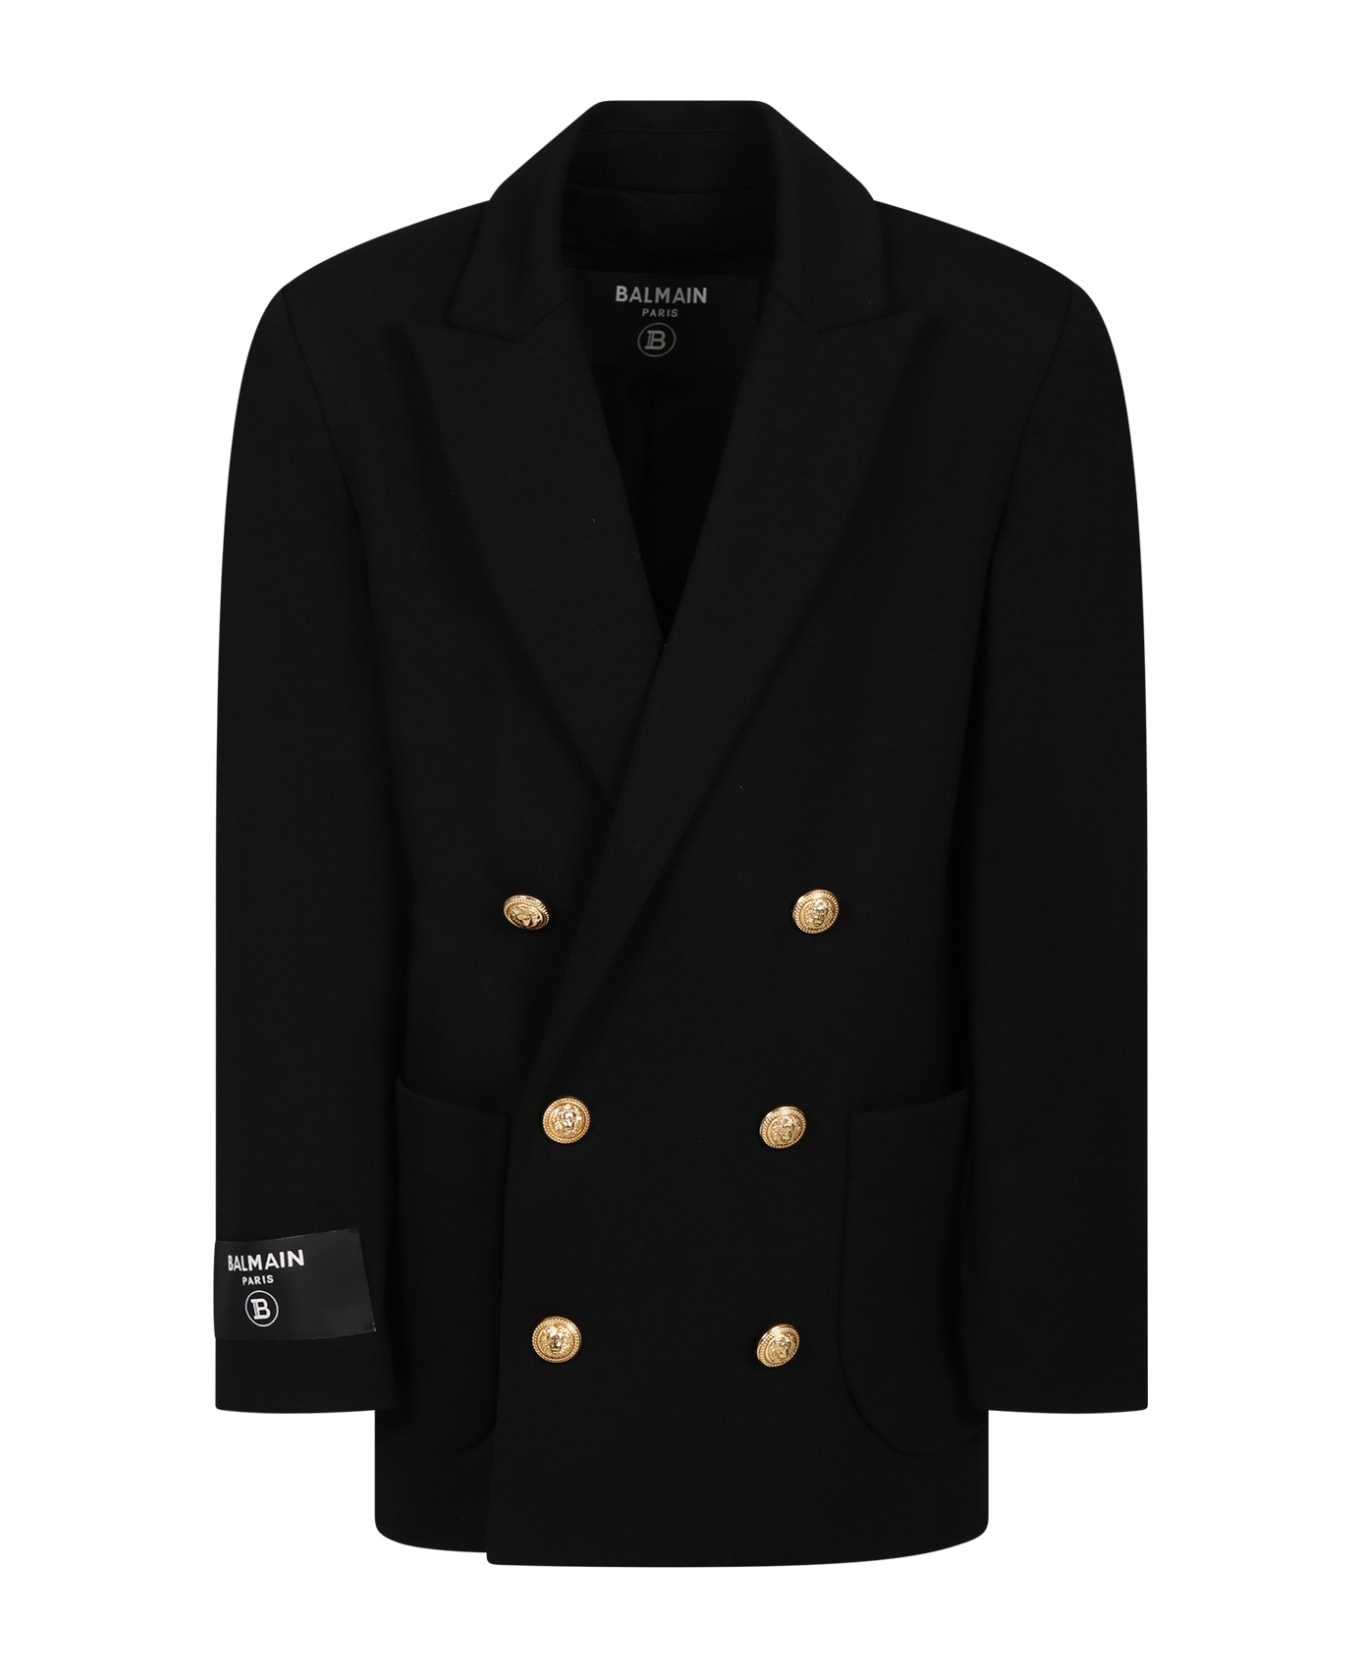 Balmain Black Jacket For Girl With Iconic Buttons - Black